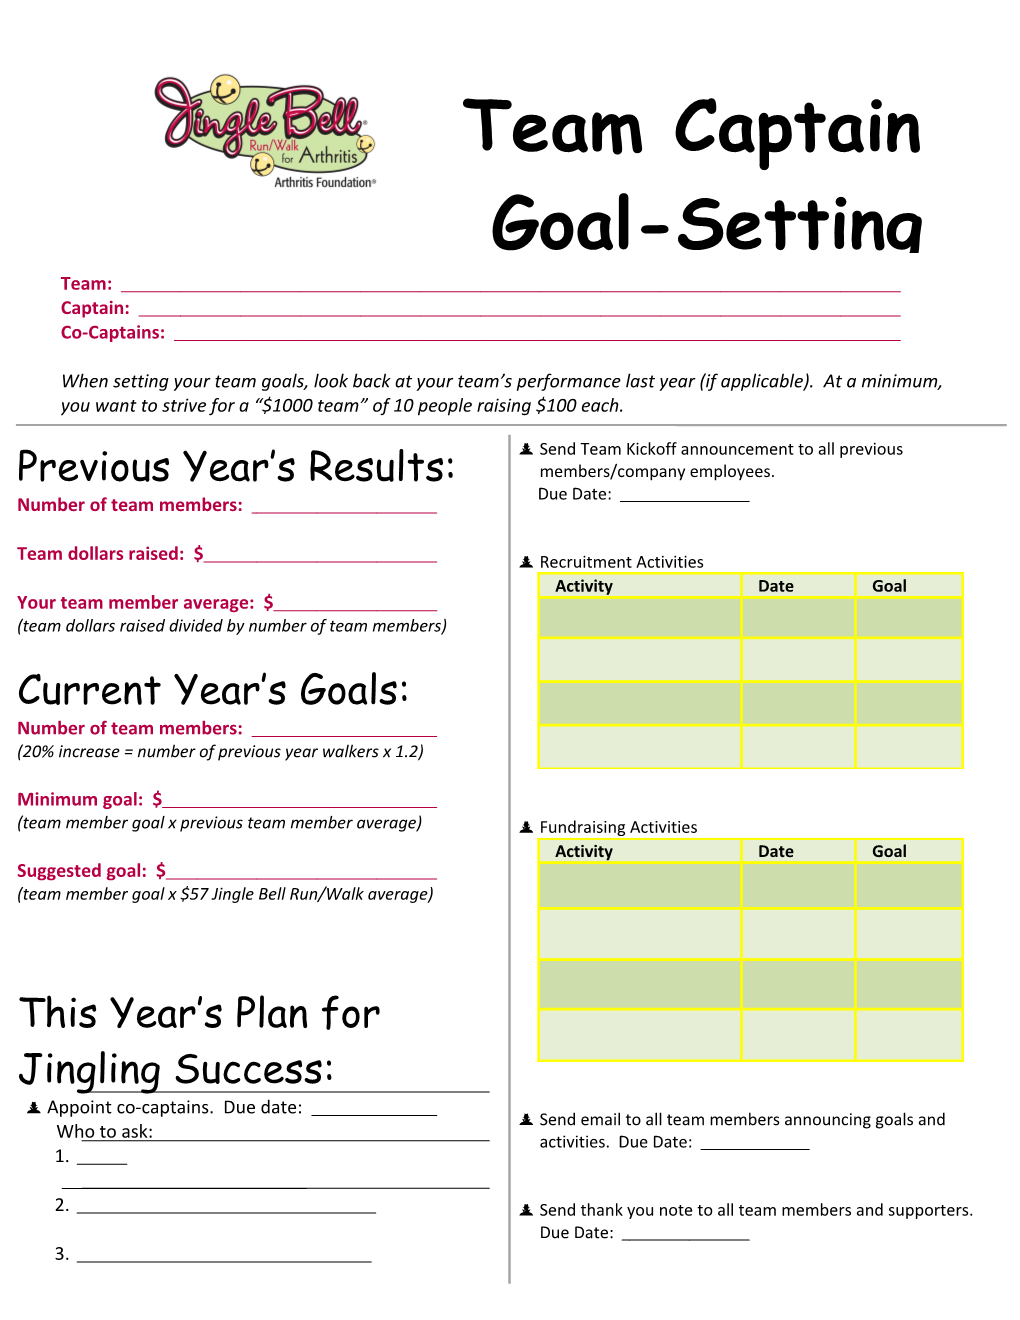 When Setting Your Team Goals, Look Back at Your Team S Performance Last Year (If Applicable)